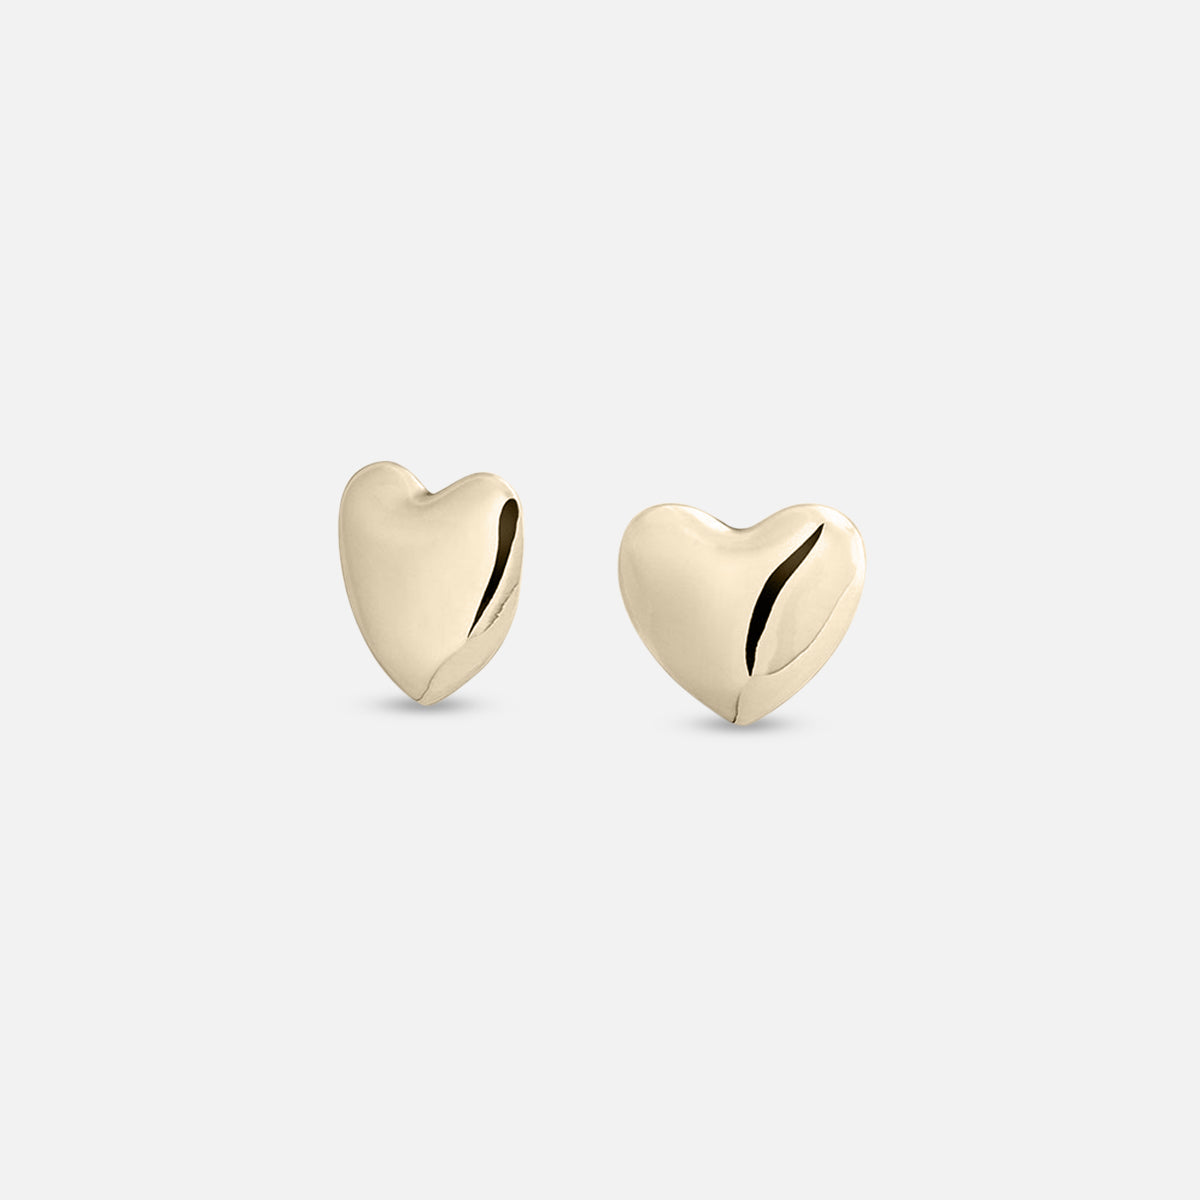 Annika Inez Gold Plated Voluptuous Heart Earring, Small - At Present